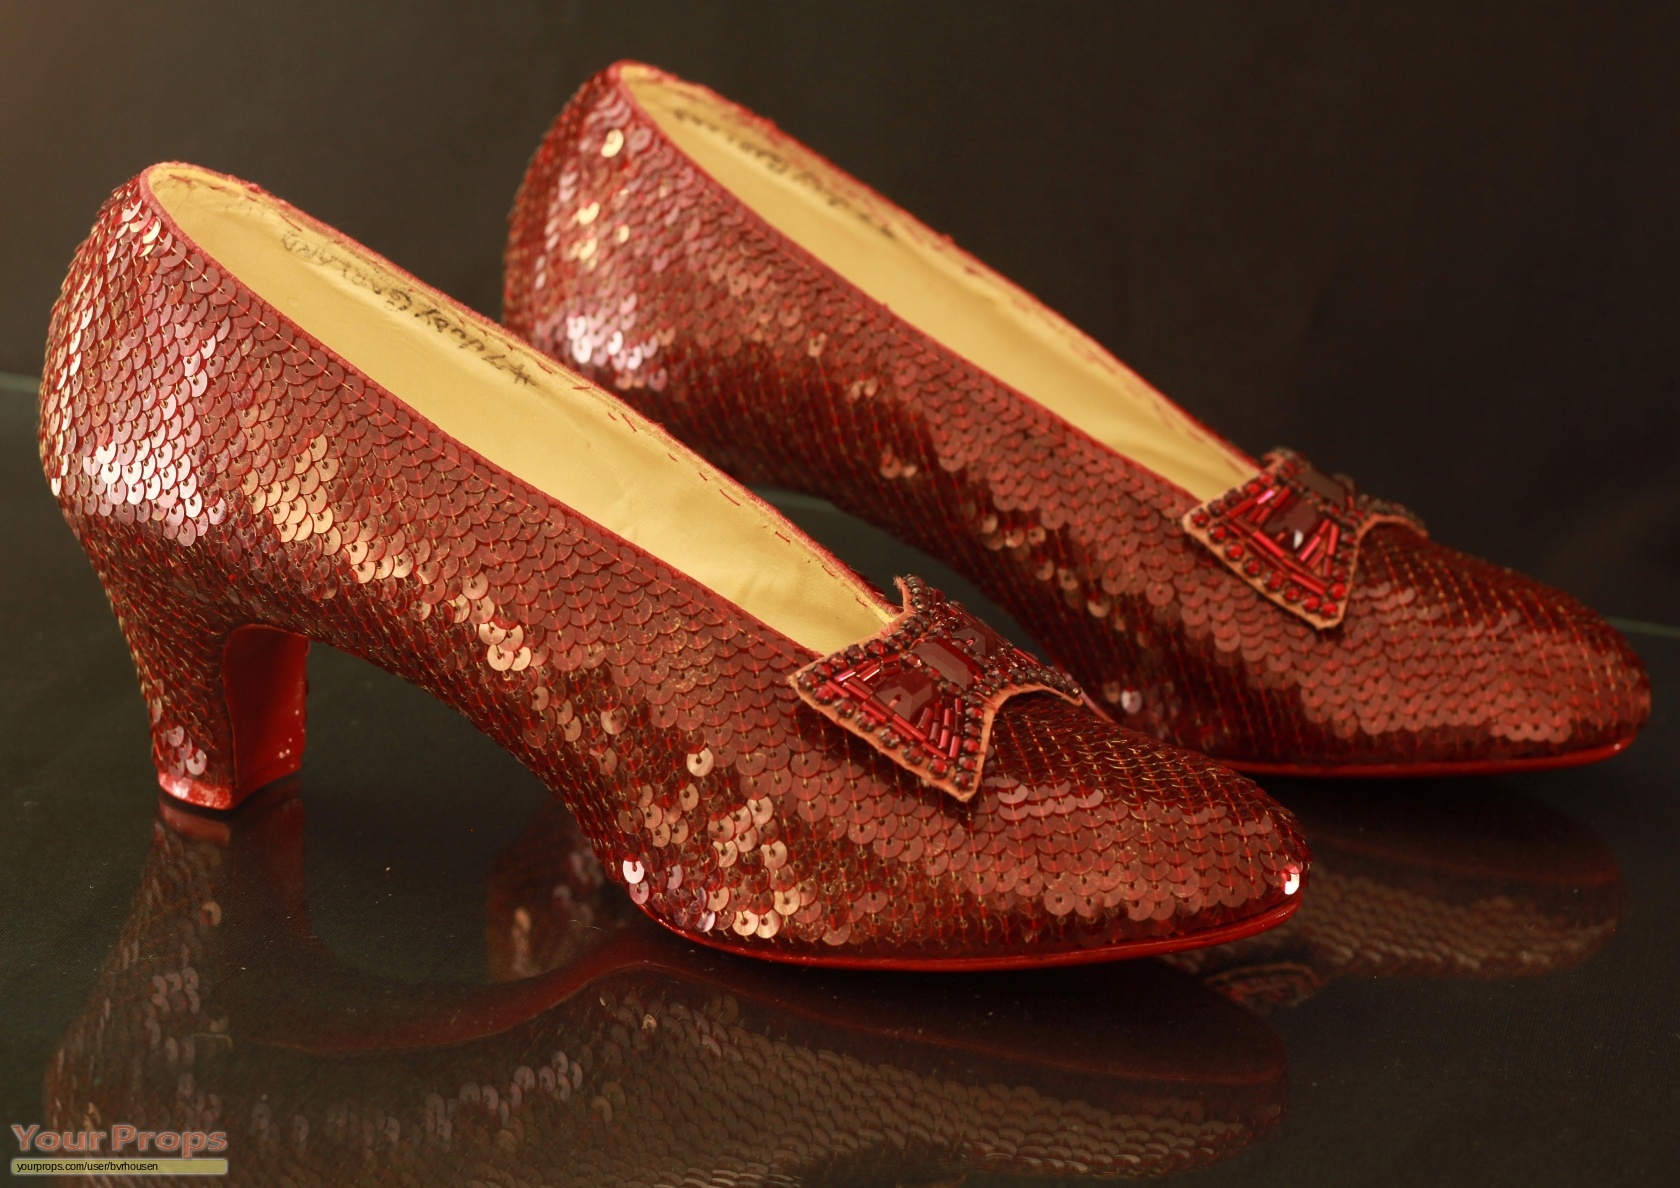 The Wizard of Oz Ruby Slippers replica movie costume